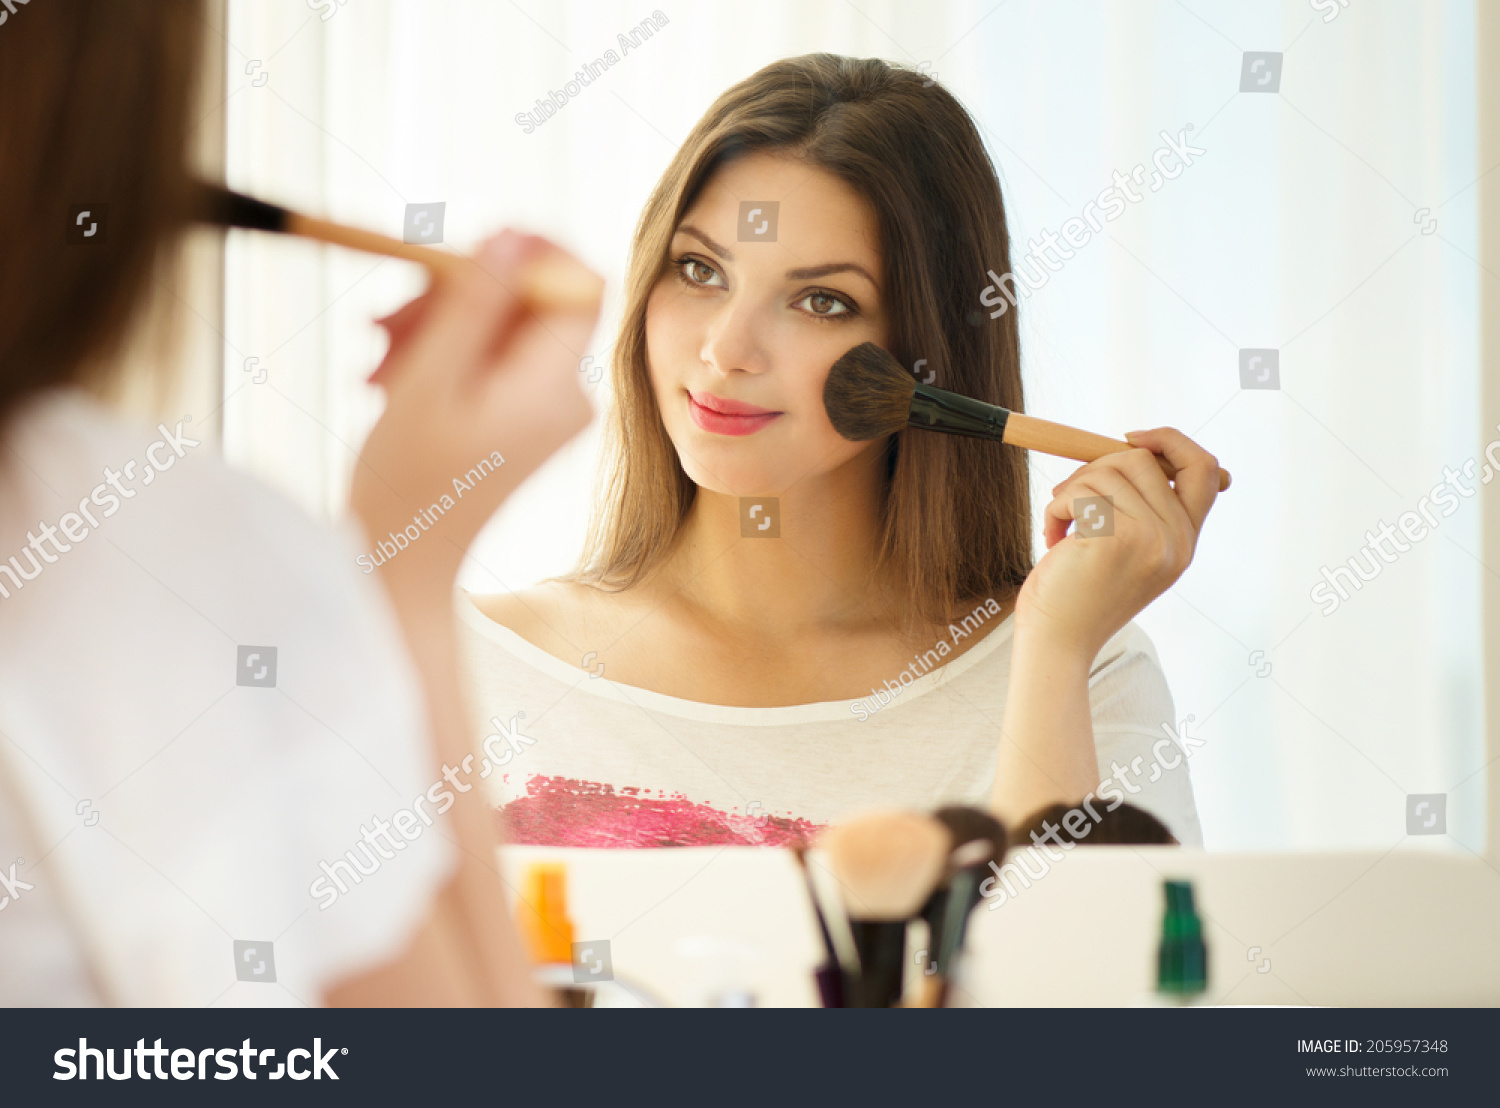 Beauty woman applying makeup. Beautiful girl looking in the mirror and applying cosmetic with a big brush. Girl gets blush on the cheekbones. Powder, rouge  #205957348